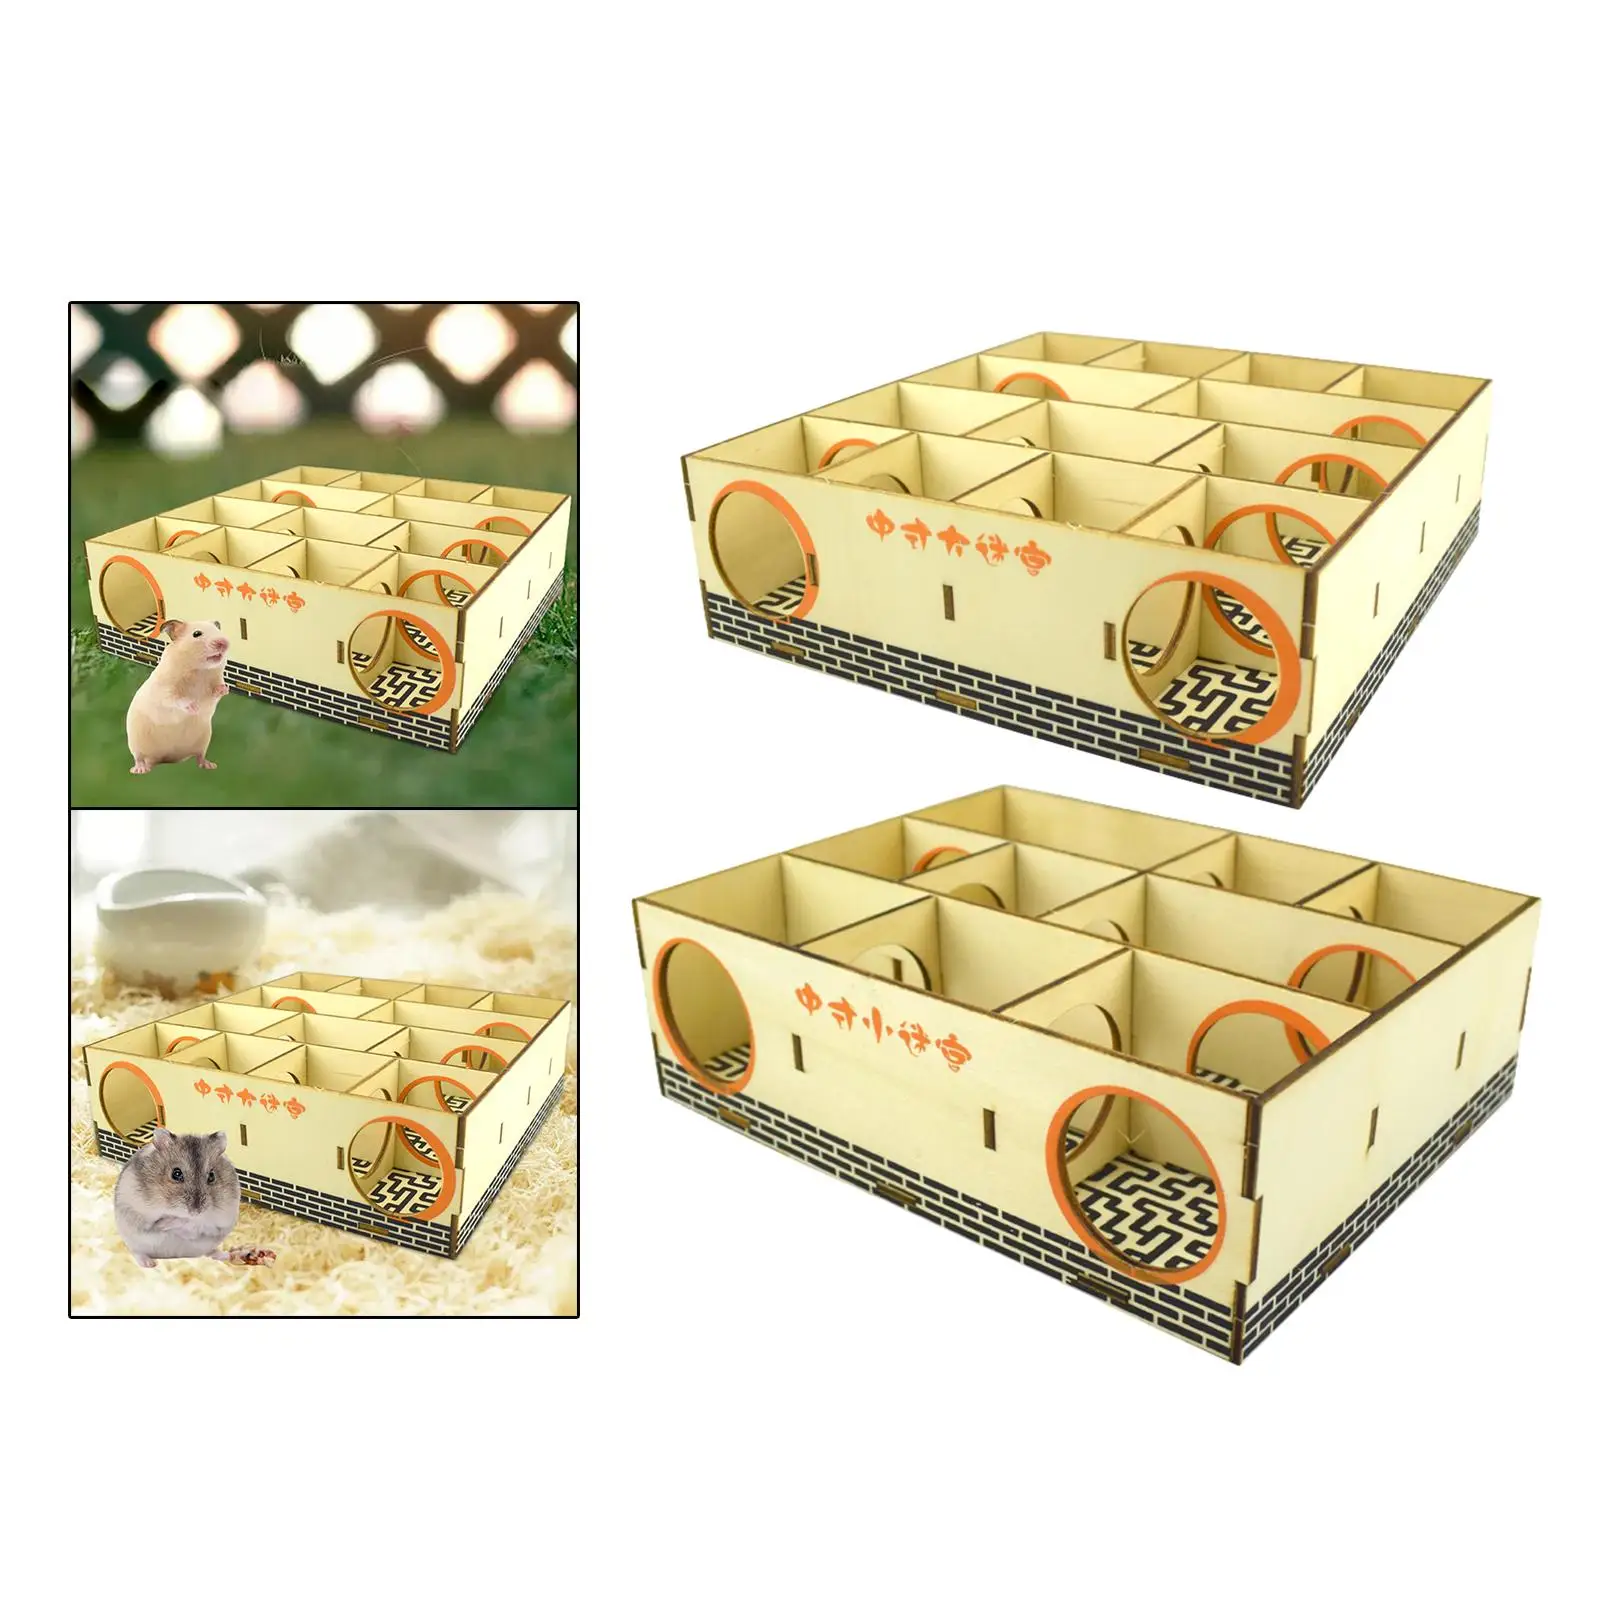 Hamster Maze Play Toys Small Animals Wood Puzzle Toy Wooden Hamster House